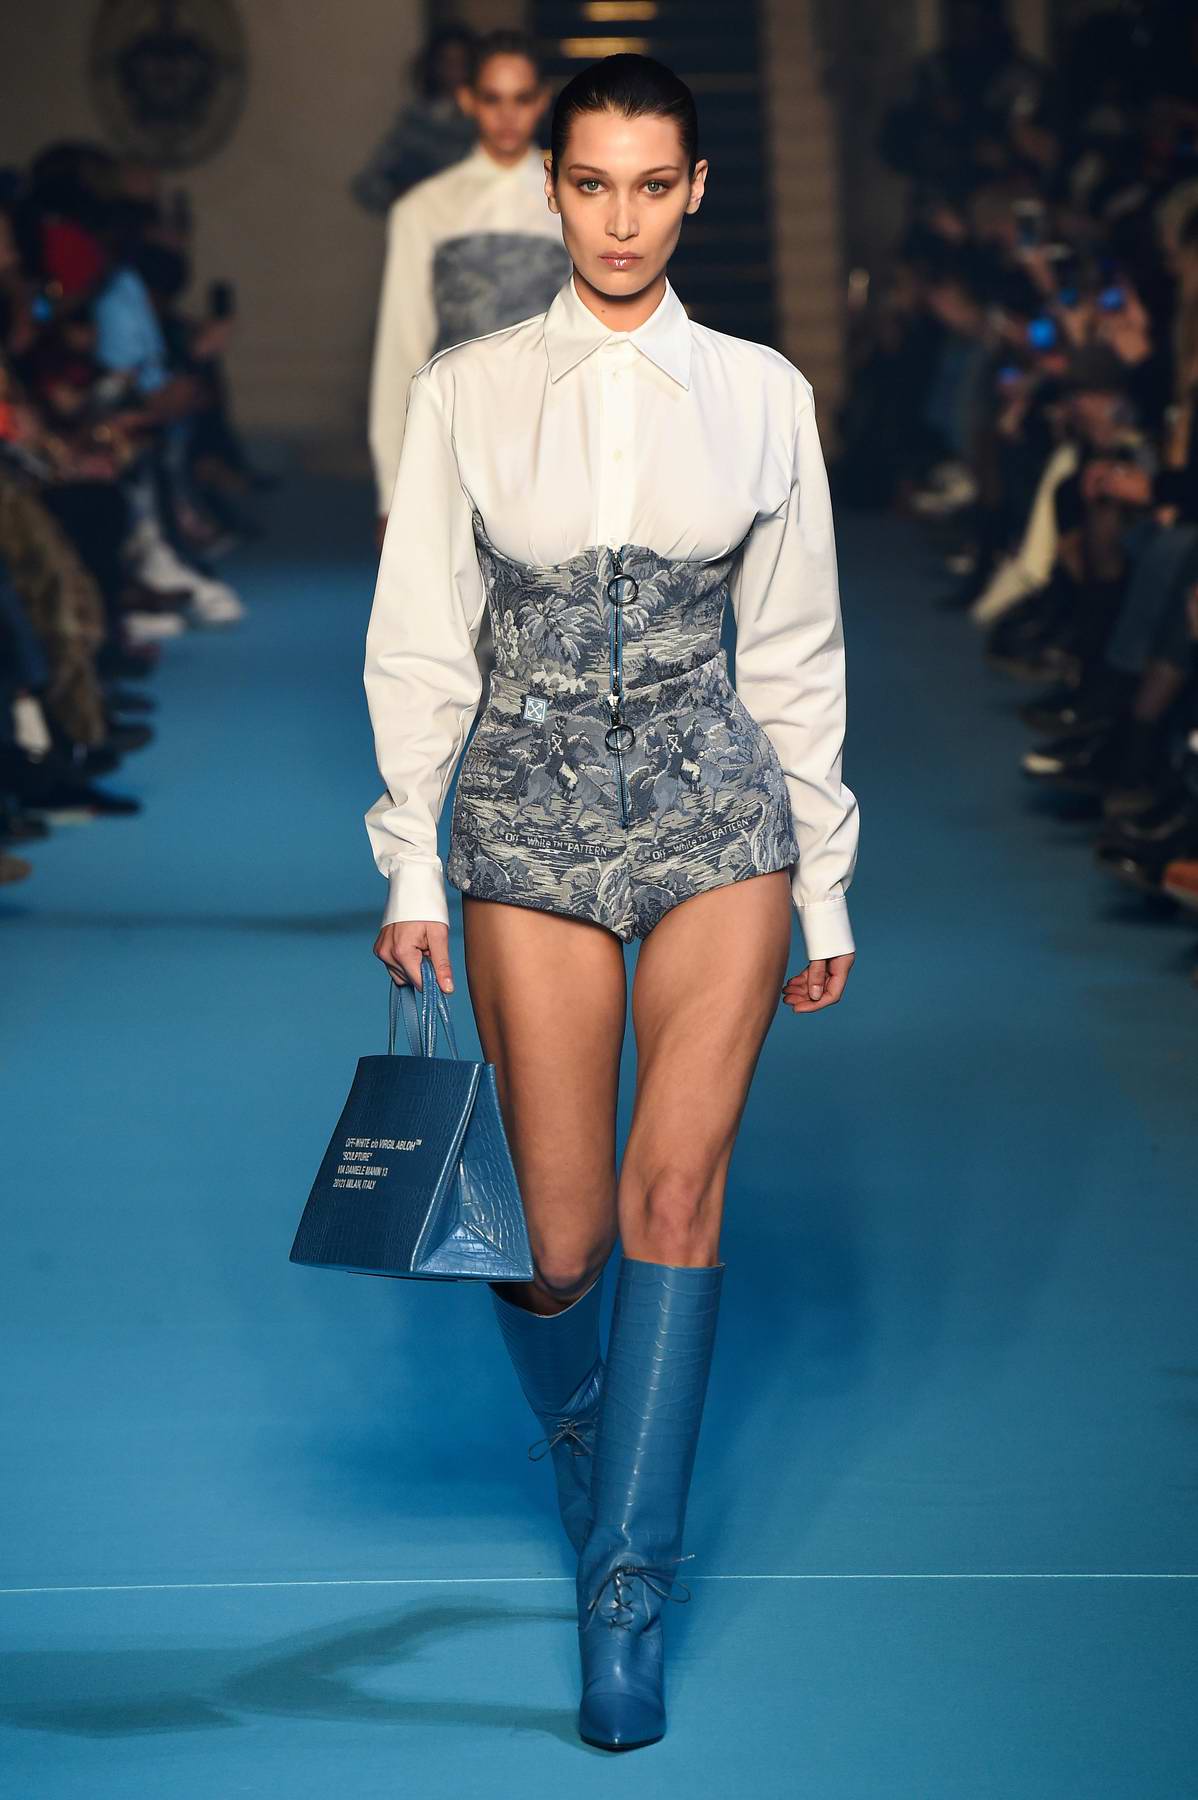 Model Grace Valentine walks on the runway at the Louis Vuitton